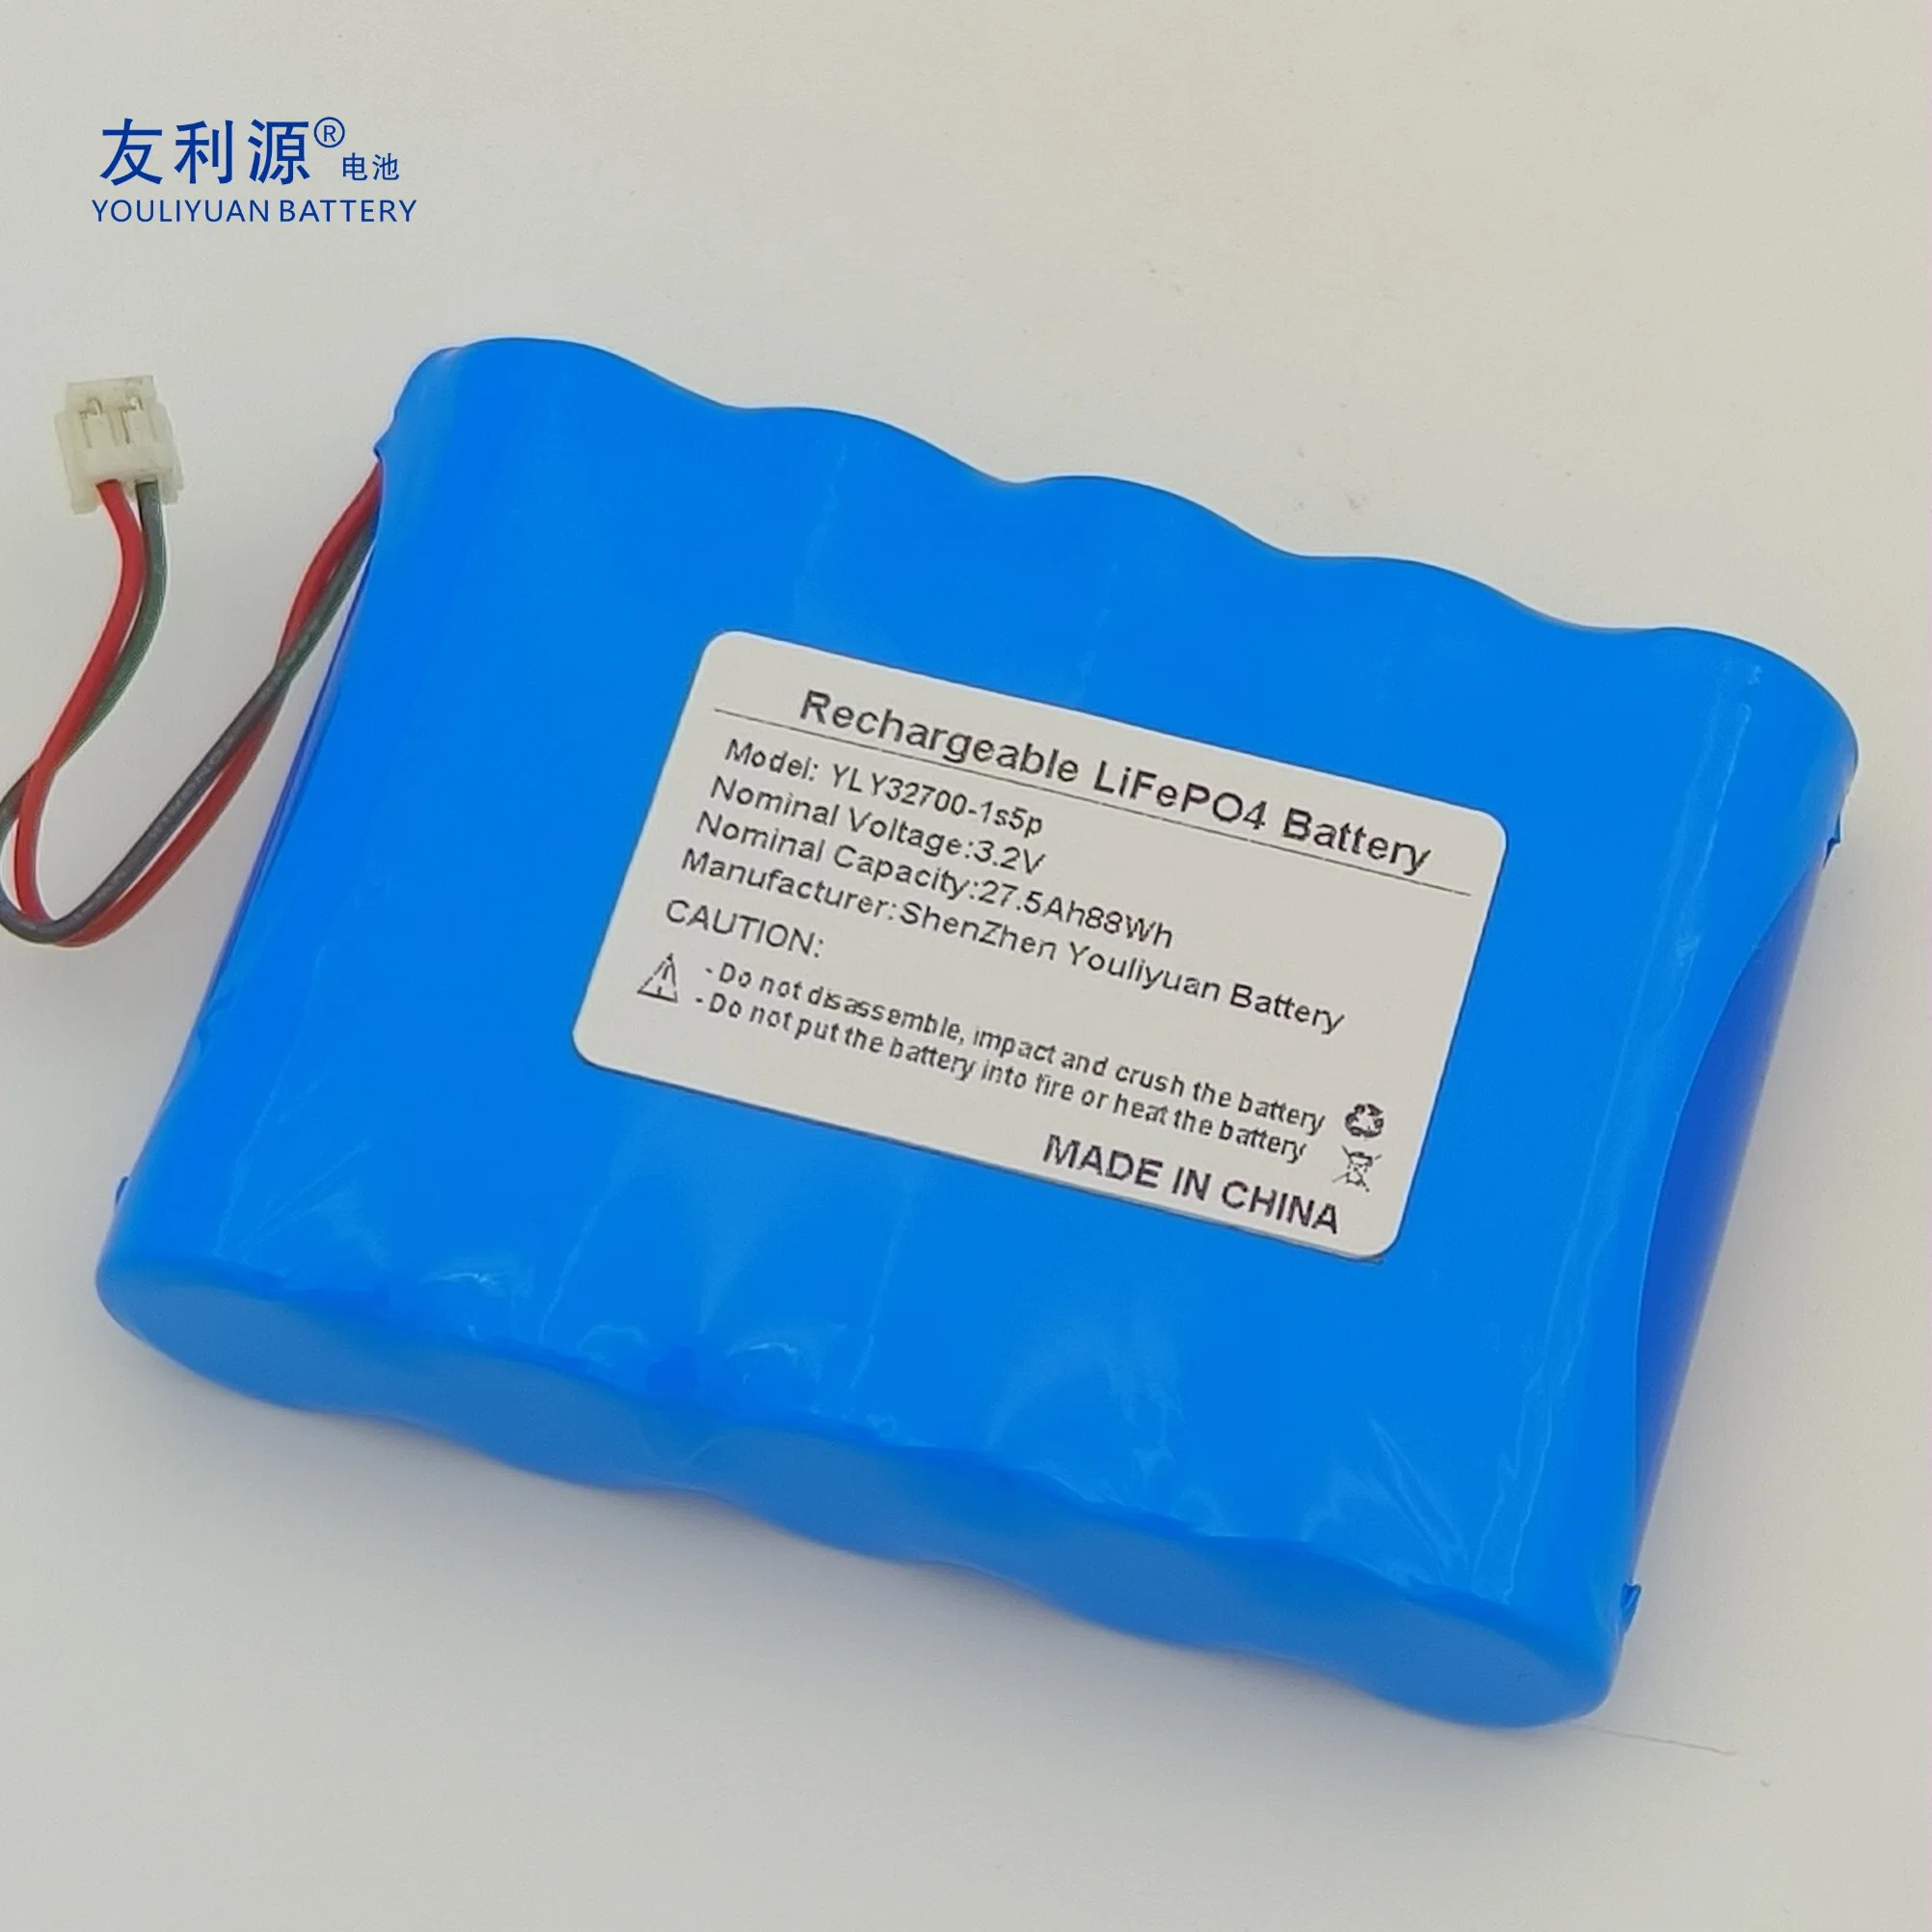 3.2V27.5ah 88wh Rechargeable LiFePO4 Battery Pack with PCM Wires Connector for Solar LED Light/Alarm System/Solar Street Light